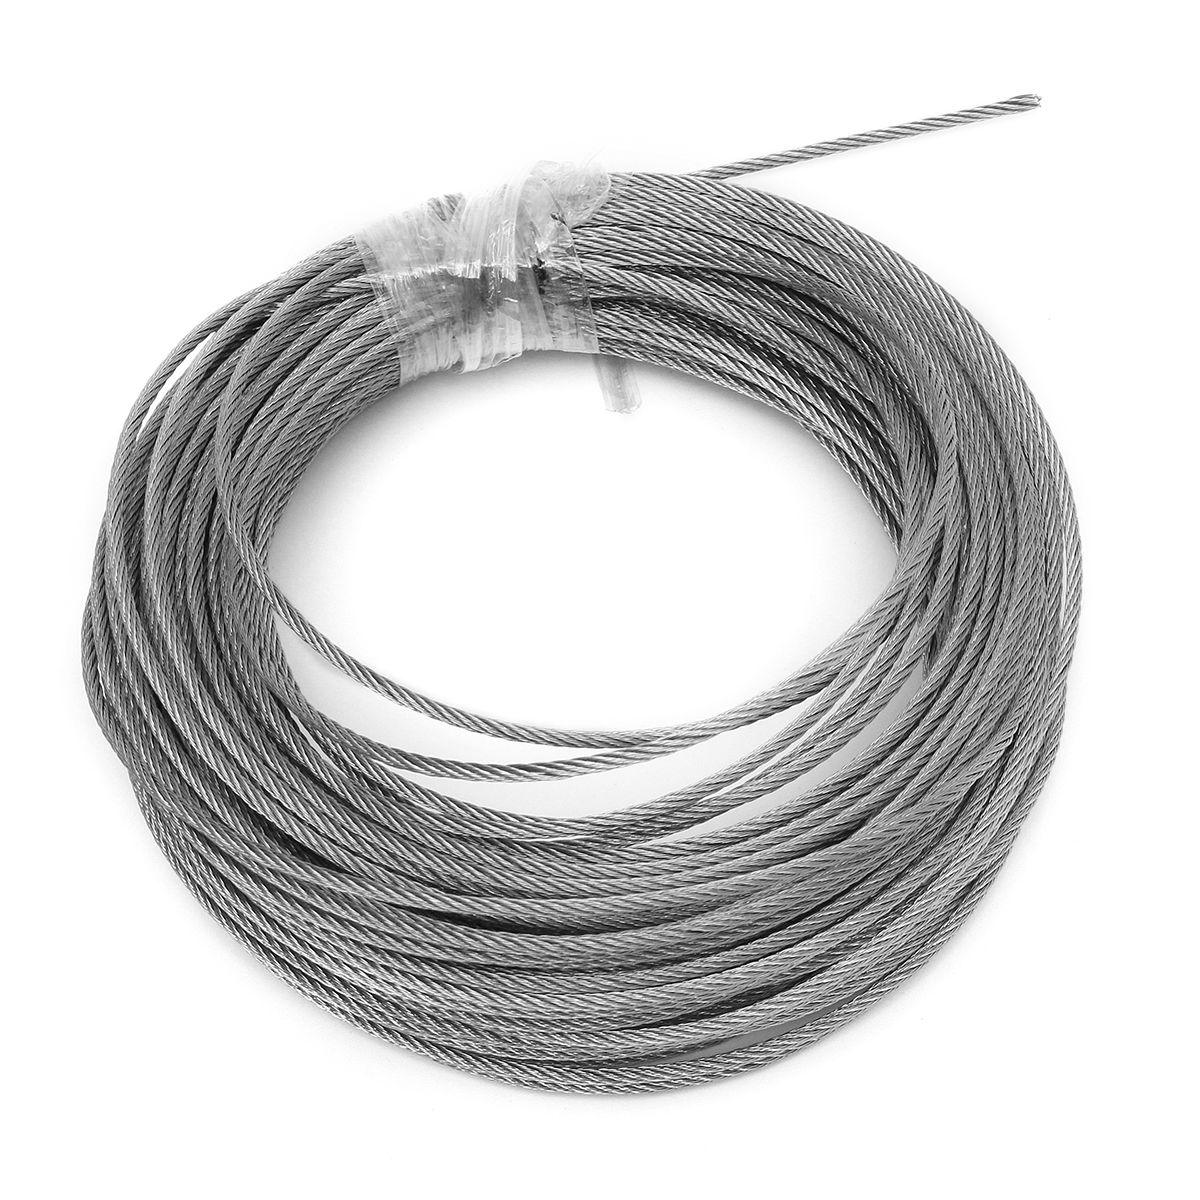 3mm-Stainless-Steel-Wire-Rope-Tensile-Diameter-Structure-Cable-1256987